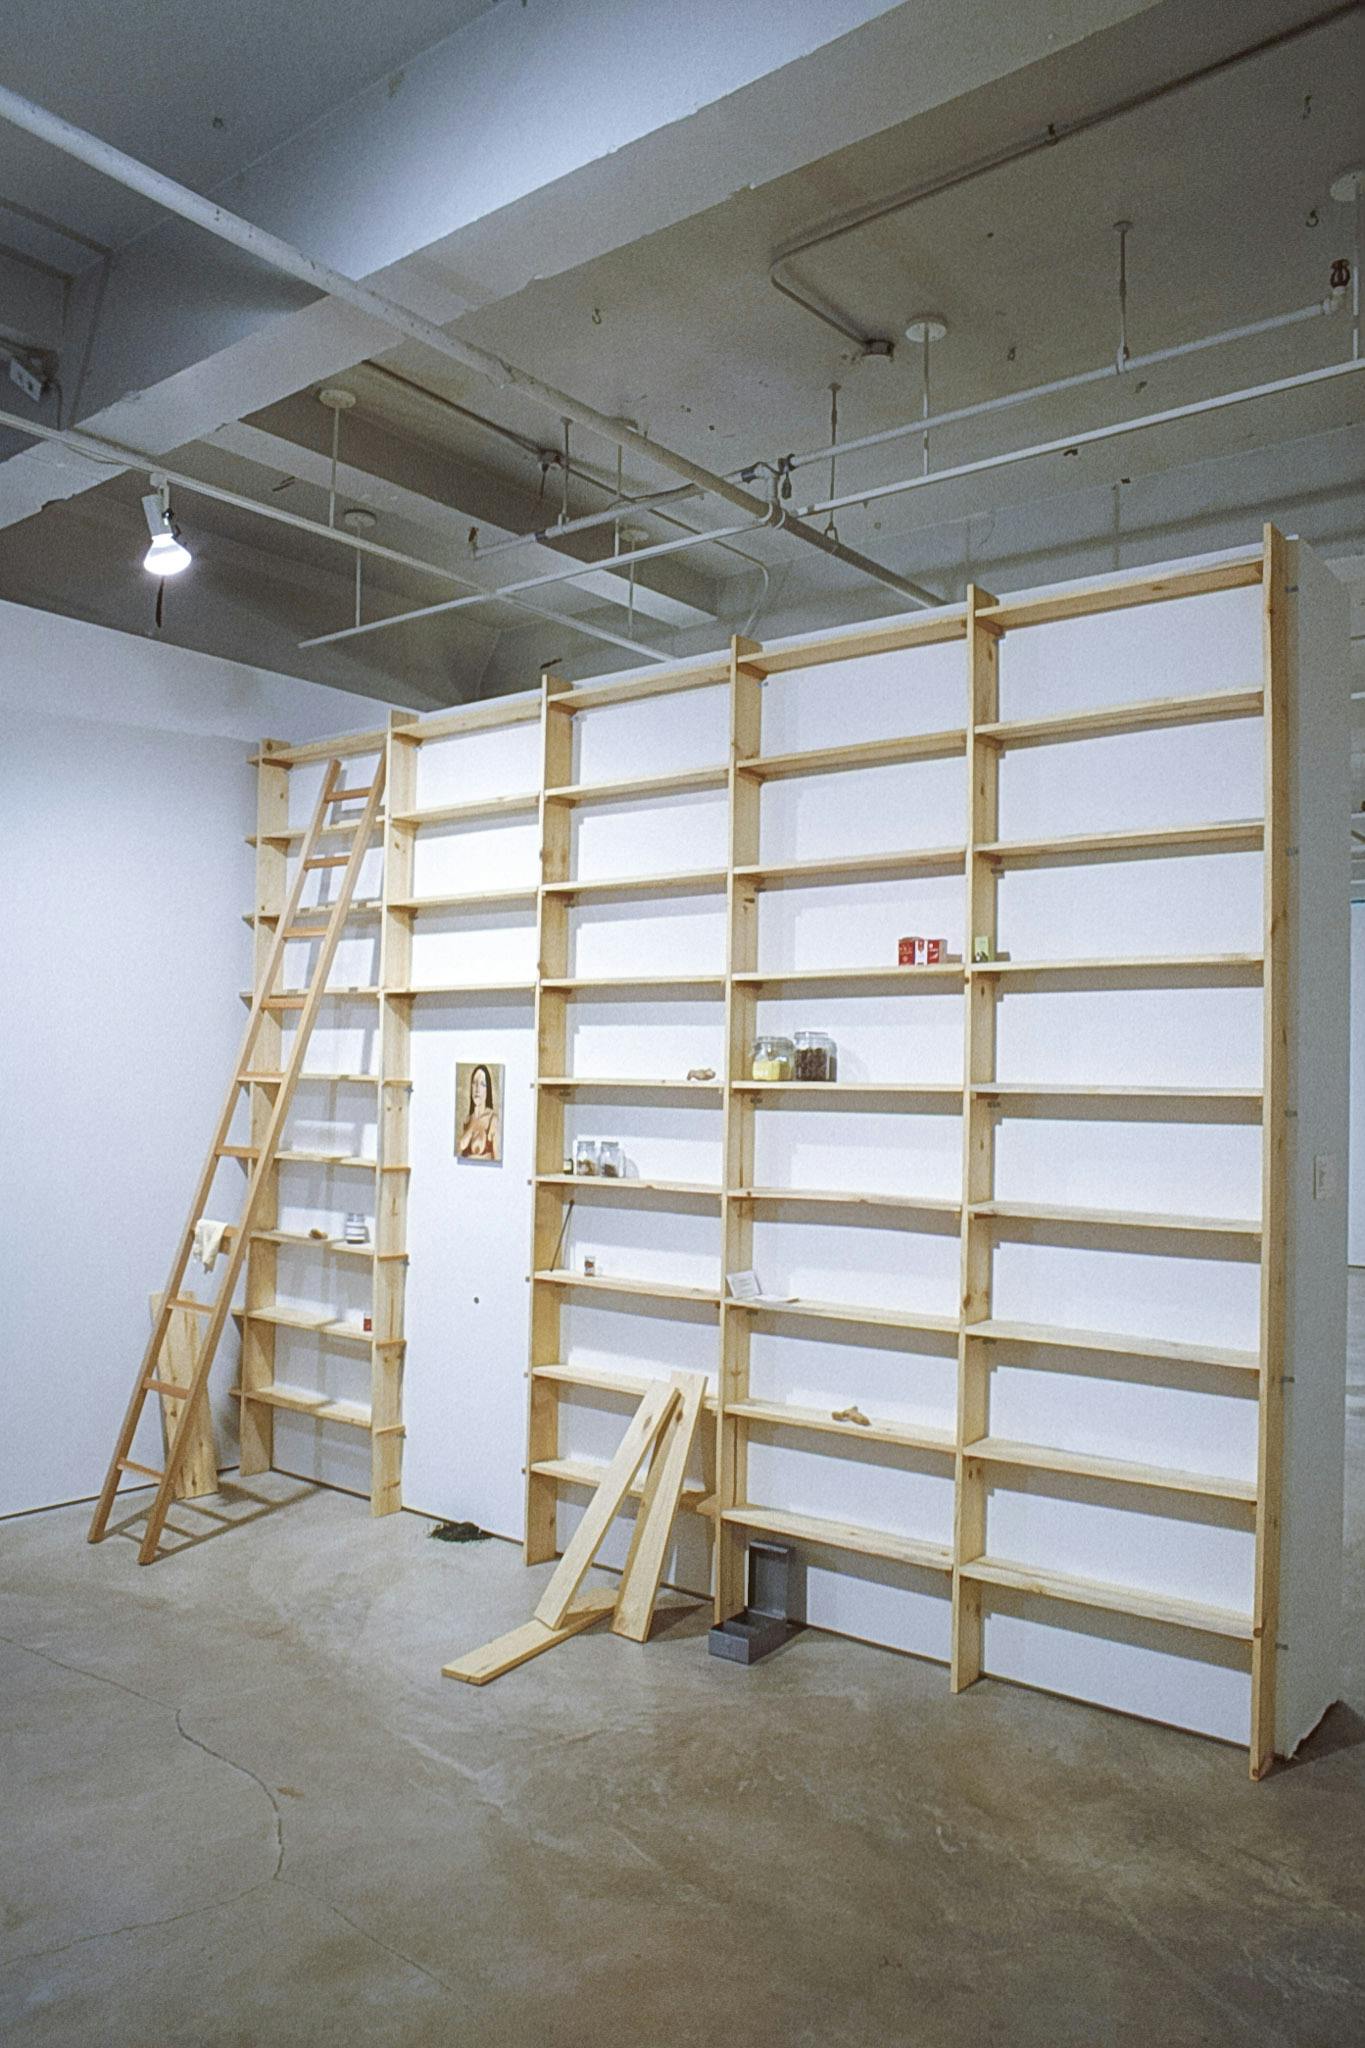 This is a side view of a separation wall in the gallery, to which wooden pantry shelves are attached. A ladder is leaning against the shelves, and some cans and bins are placed on the shelves.